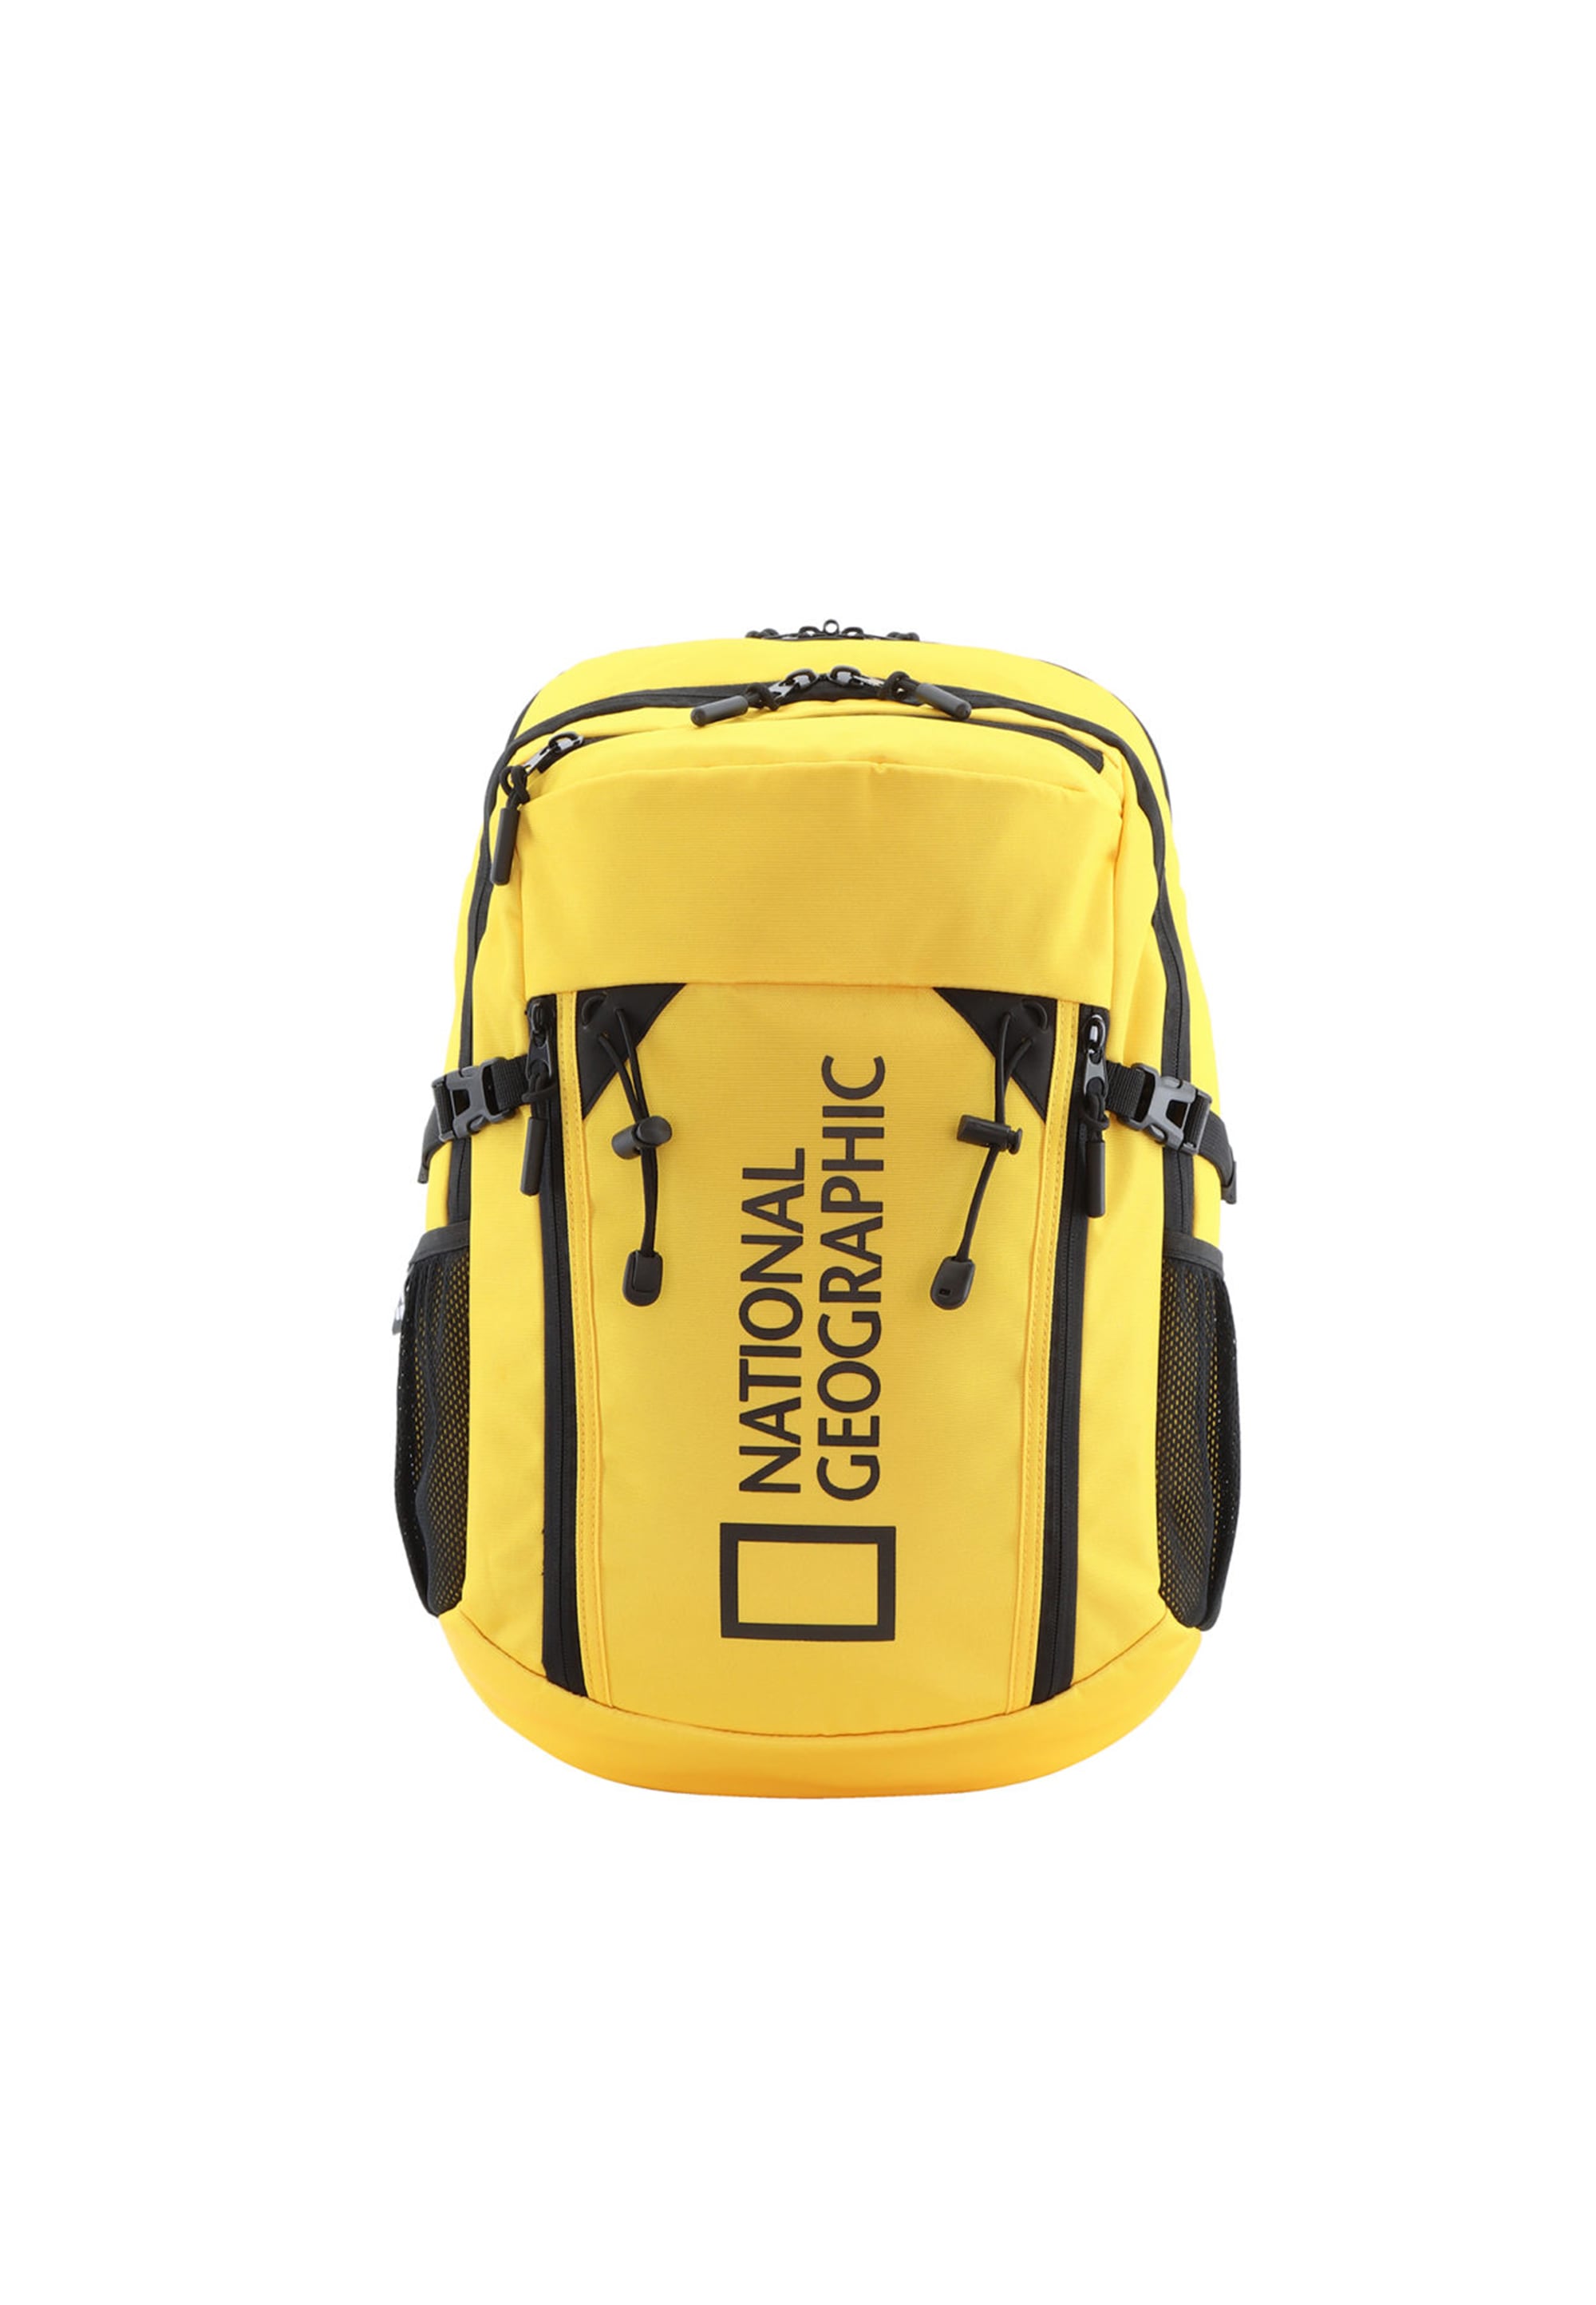 NATIONAL GEOGRAPHIC Rucksack Box Canyon Gelb, gelb, S